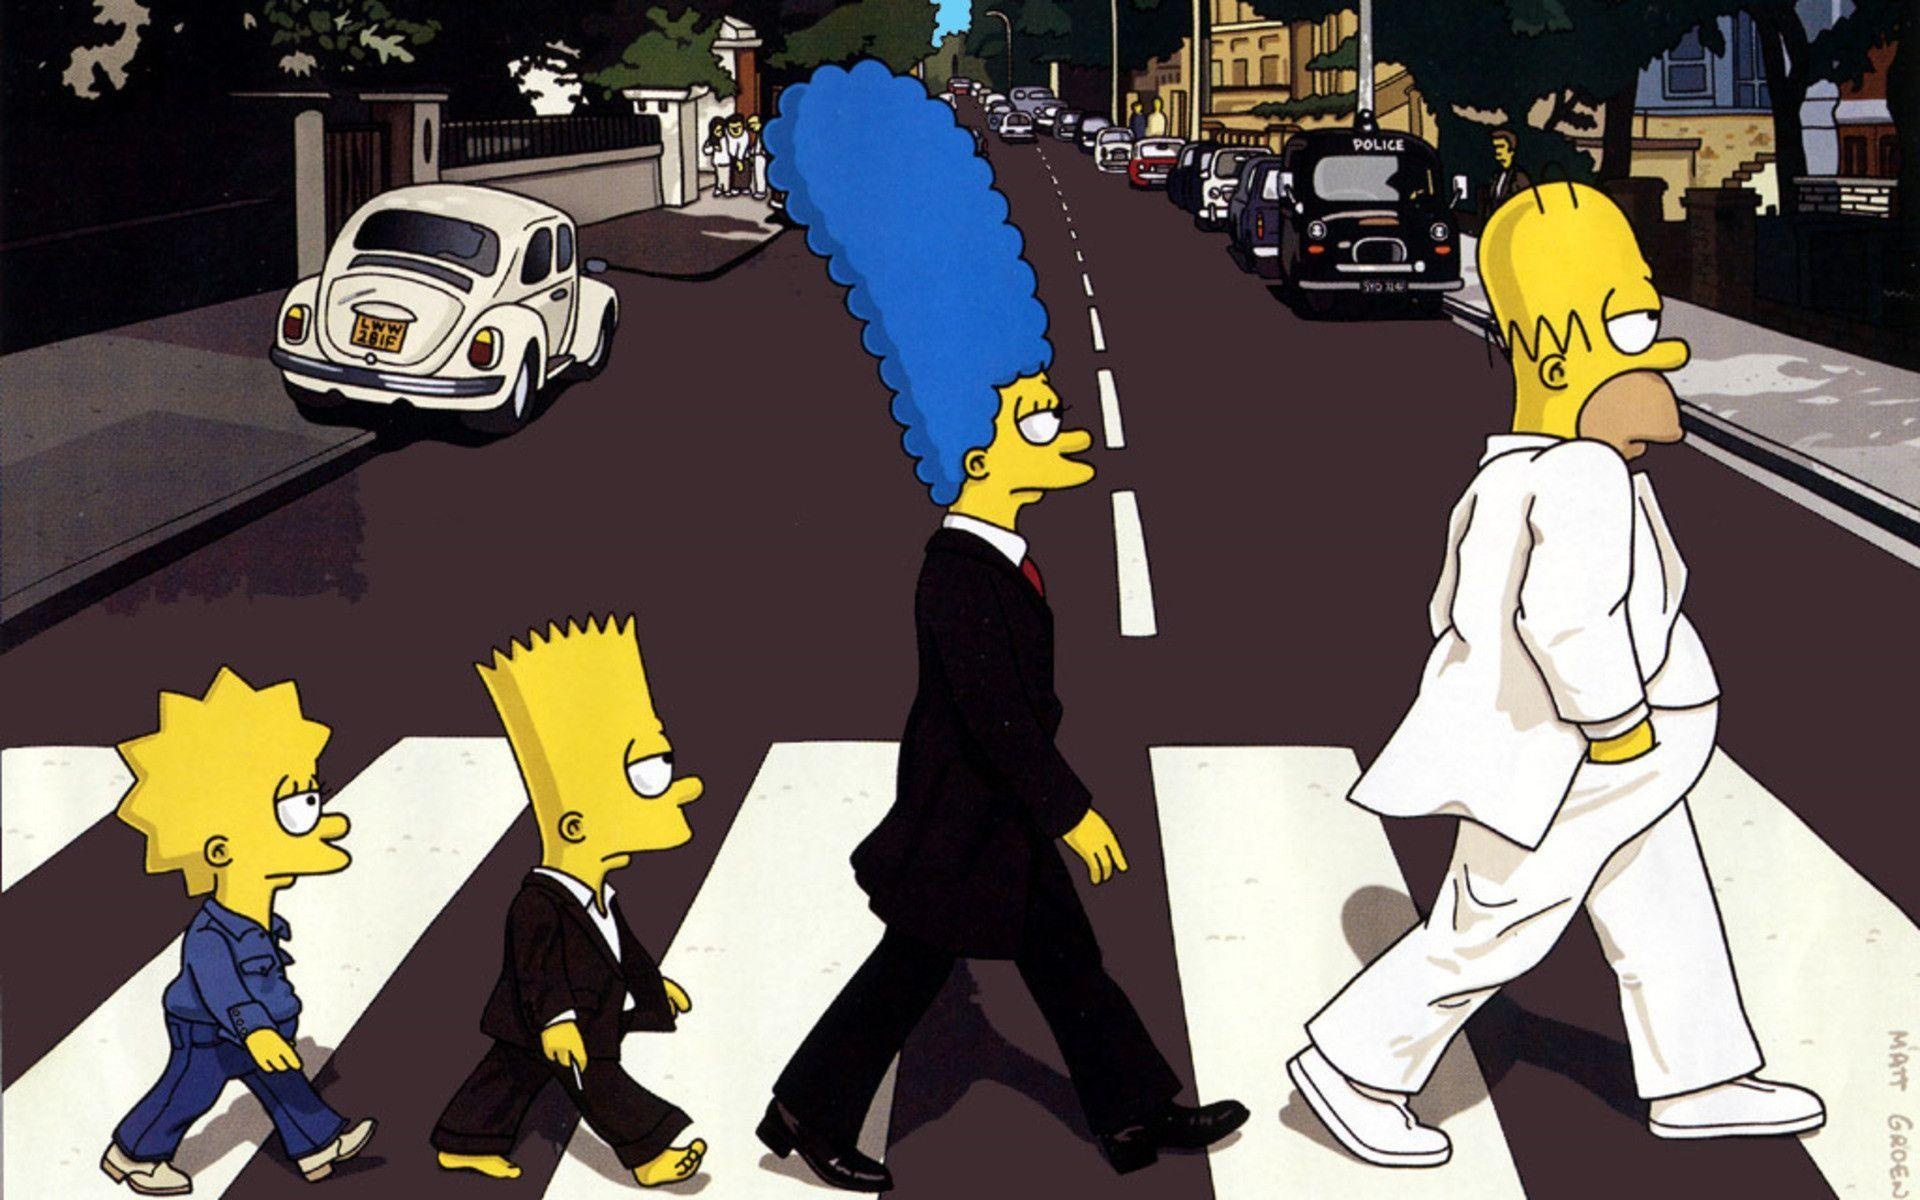 Abbey Road, The Simpsons Abbey Road wallpapers, Animated homage, Iconic crossing, 1920x1200 HD Desktop